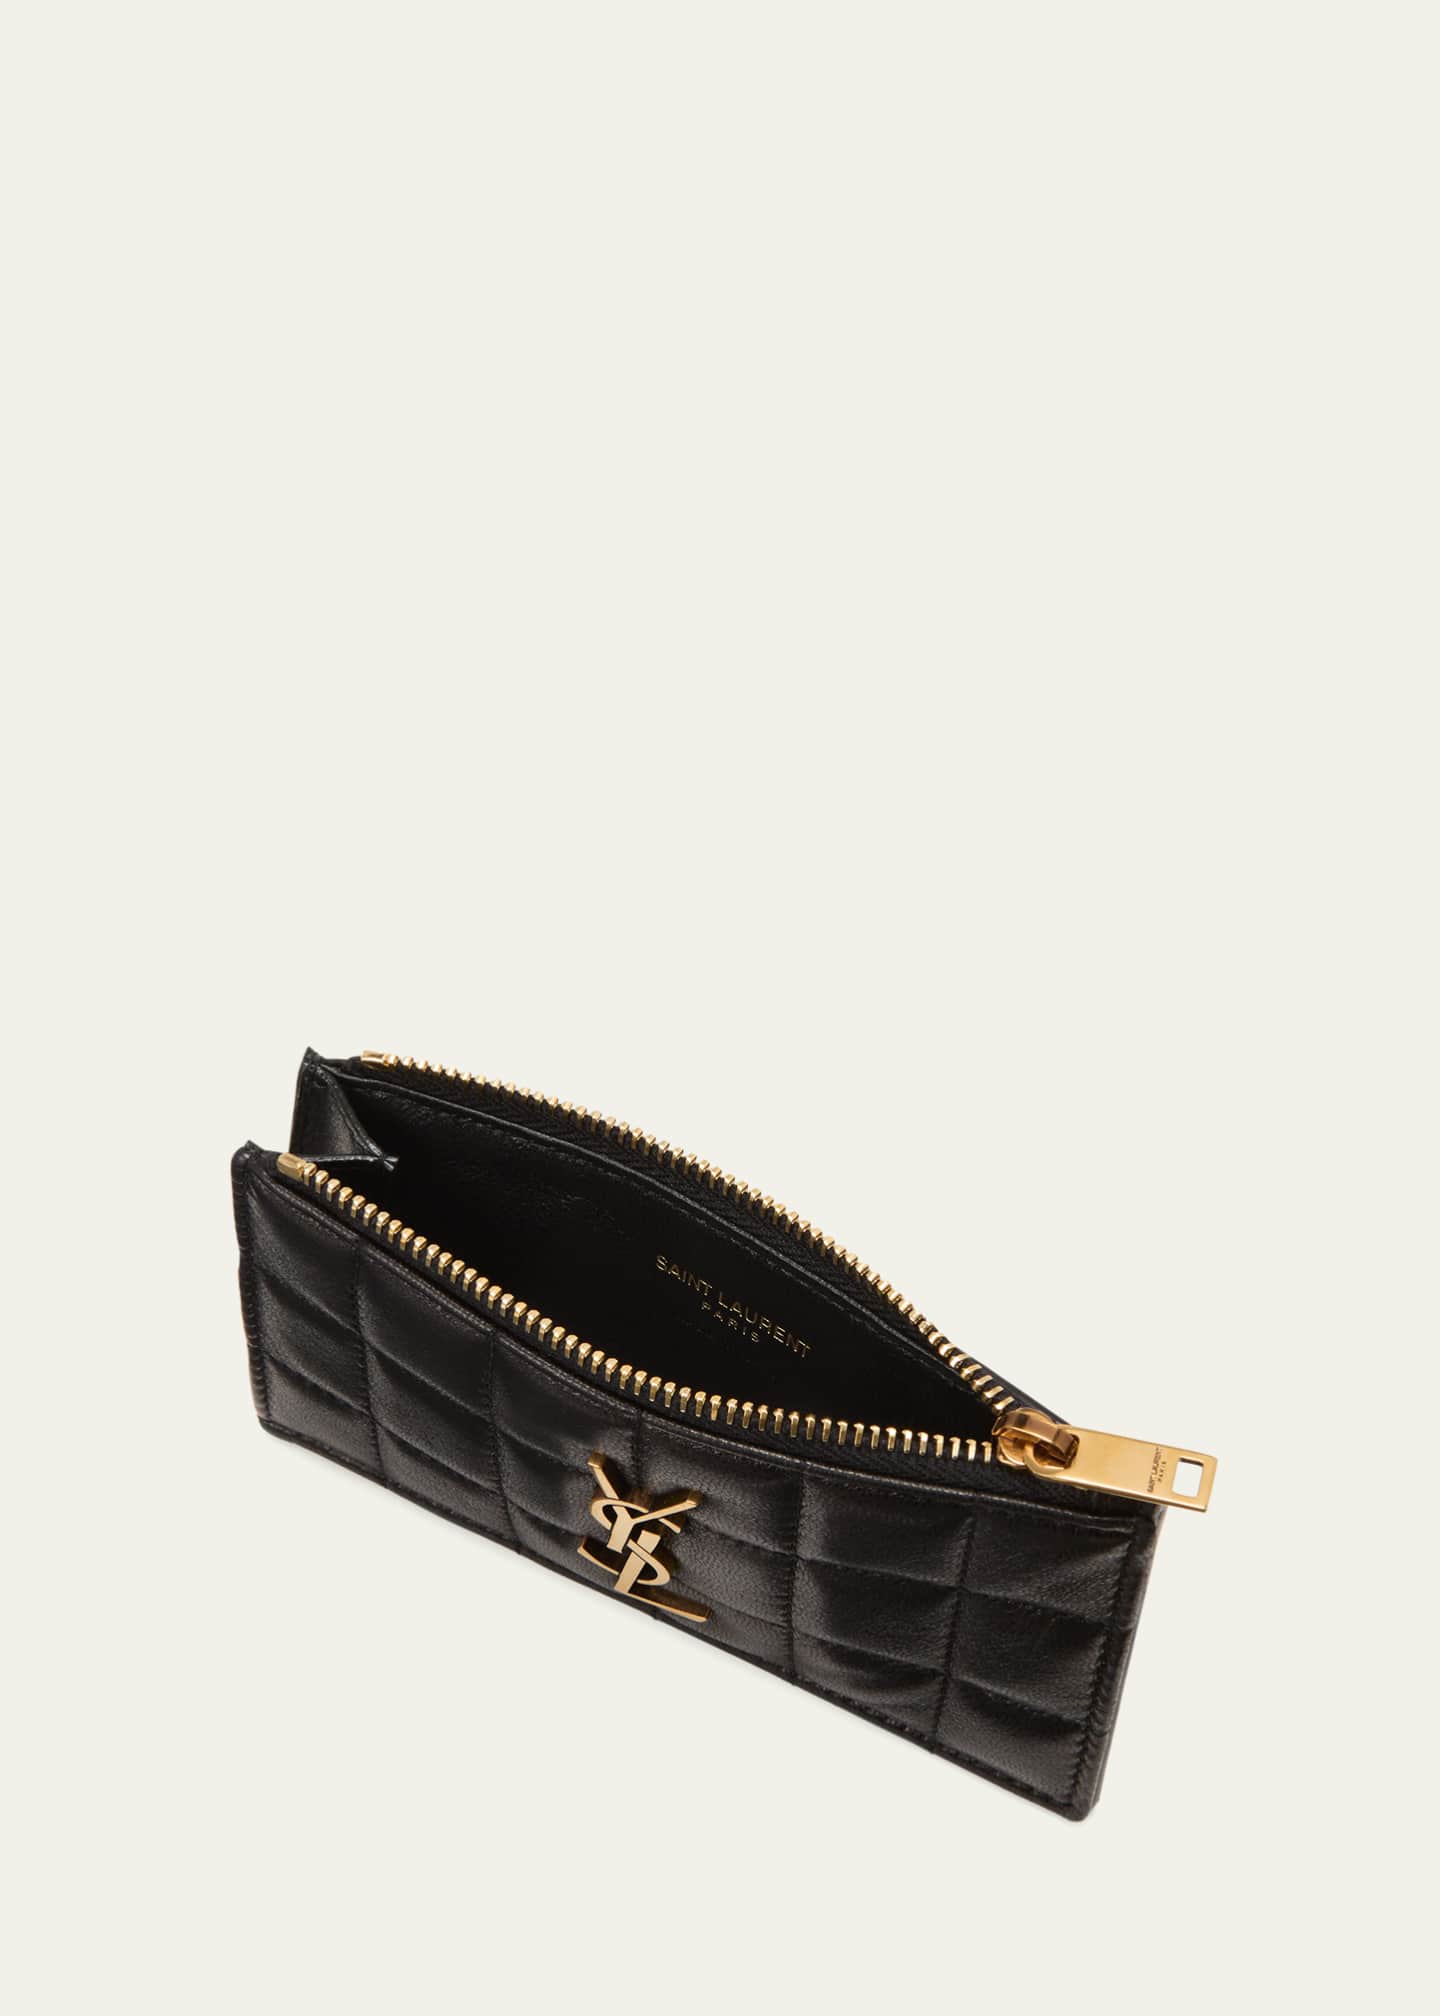 New YSL card holder with zip